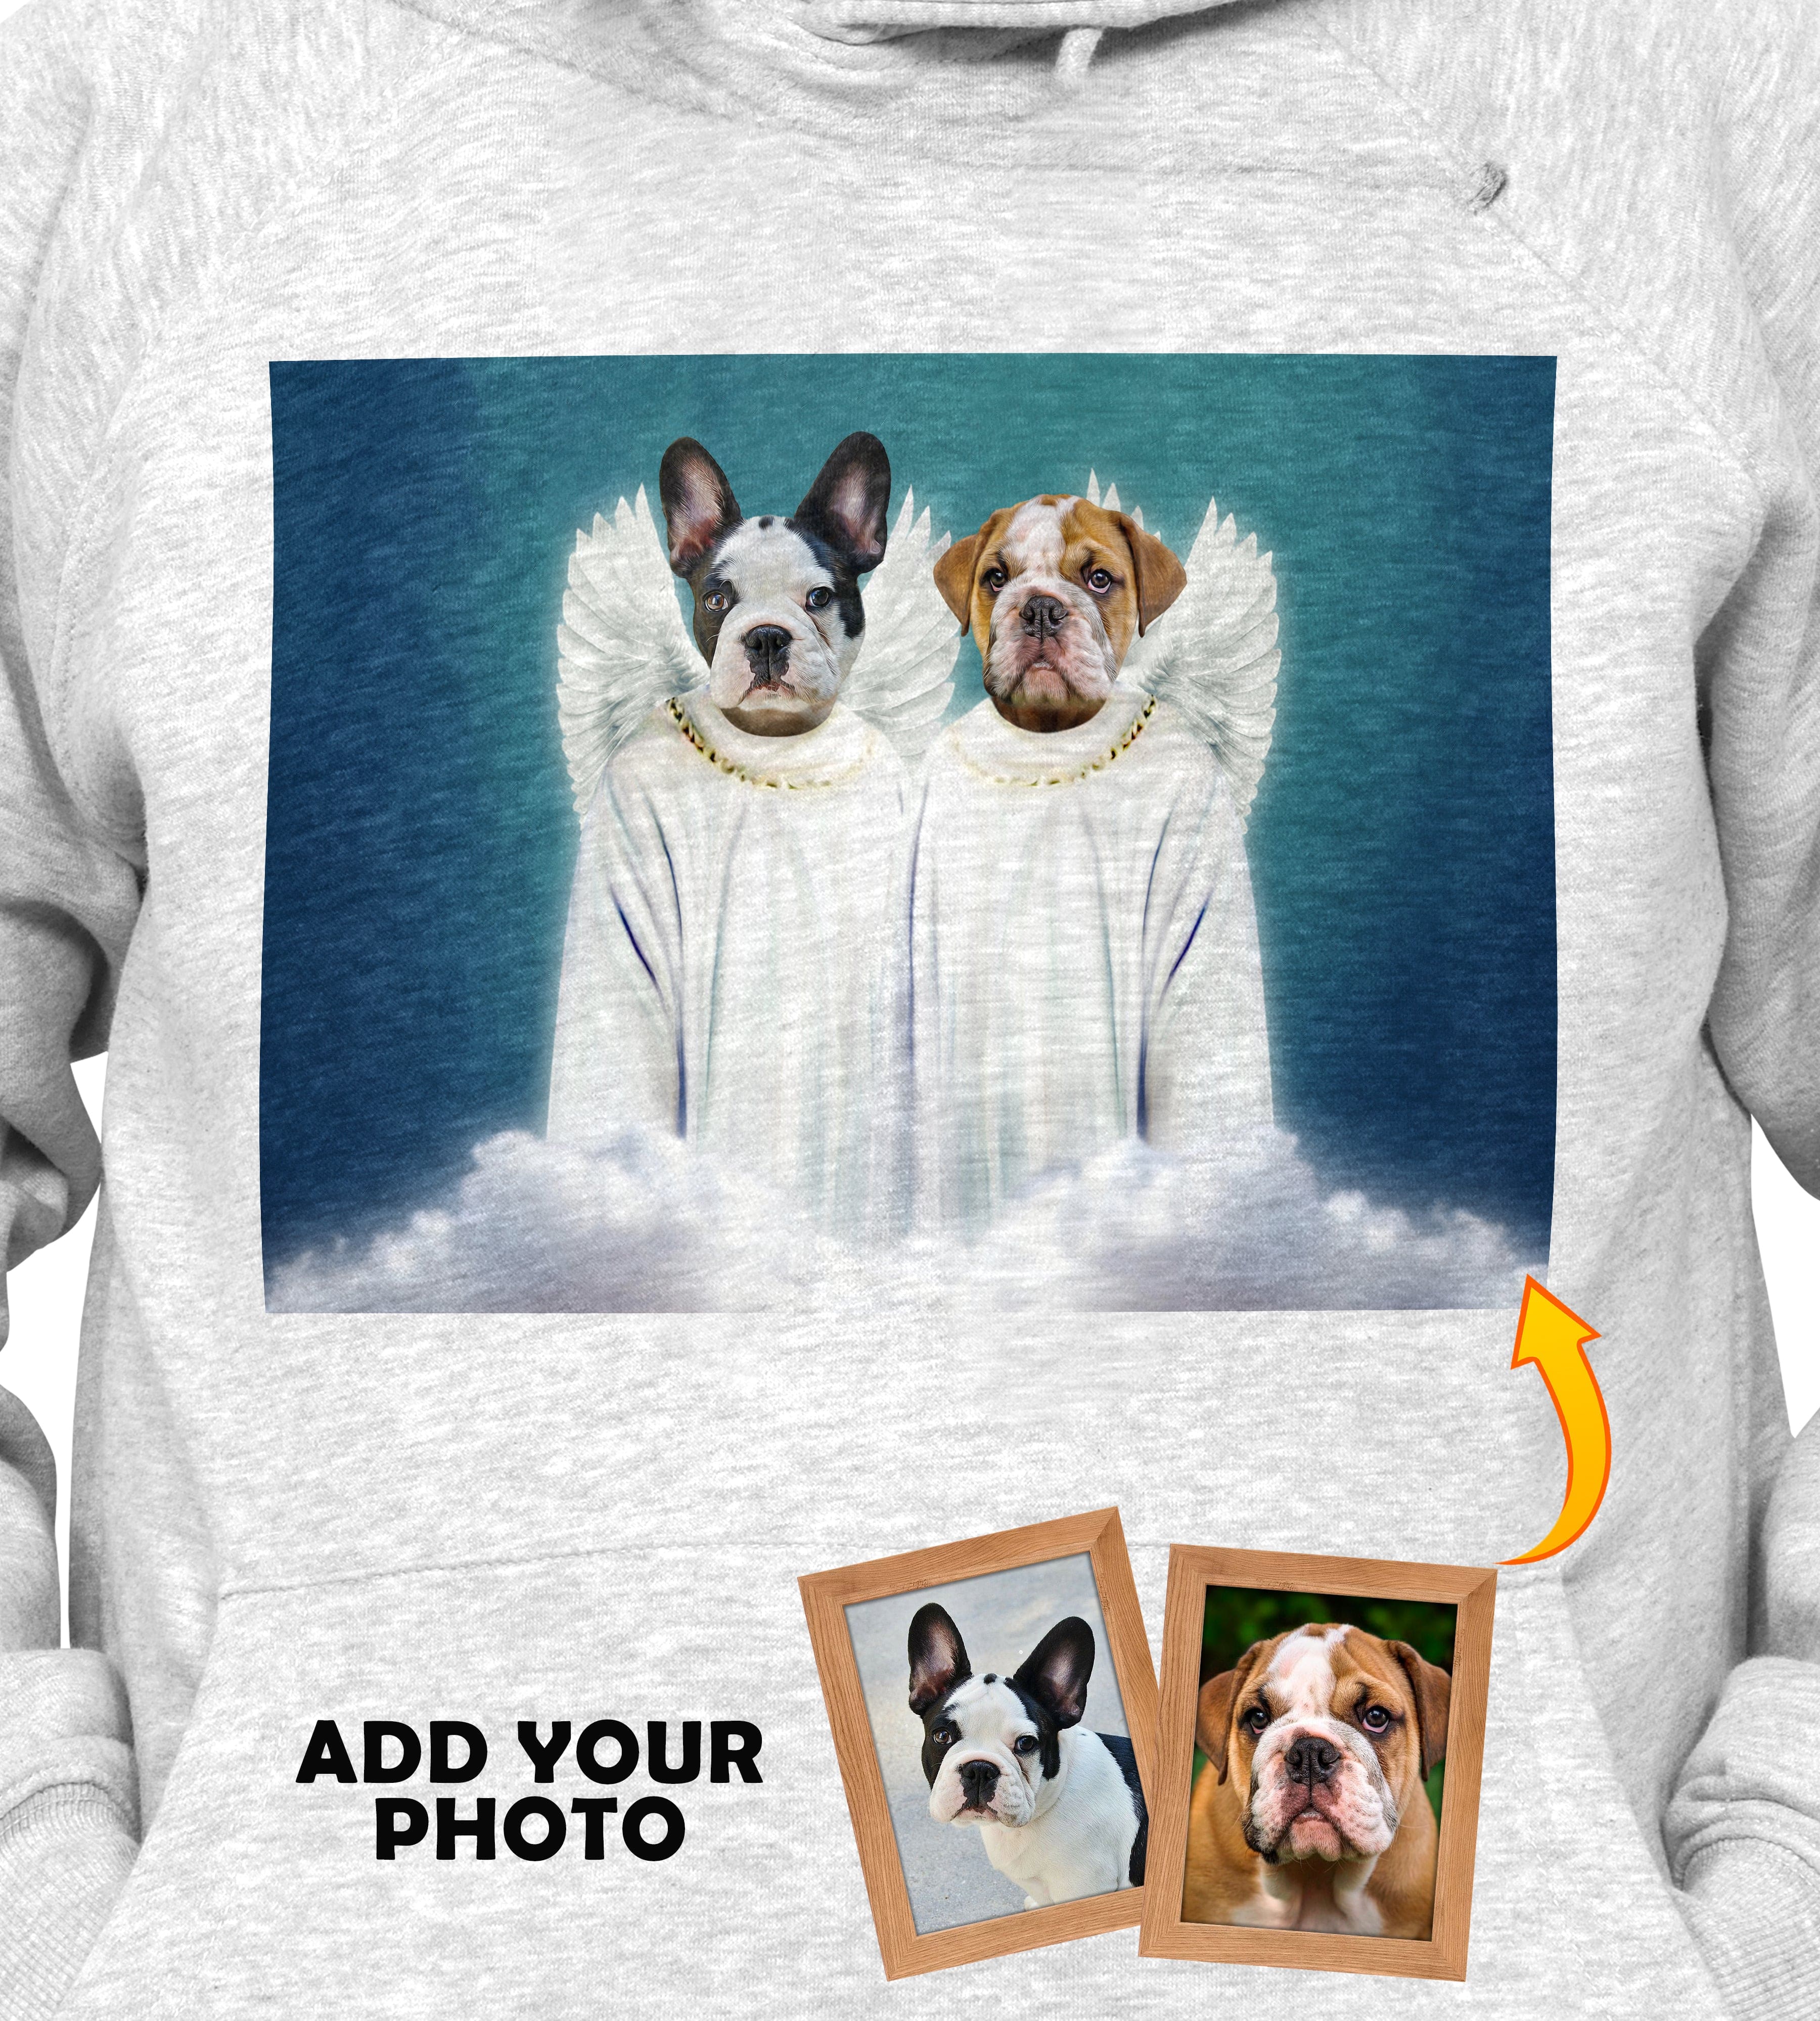 &#39;2 Angels&#39; Personalized 2 Pet Hoody